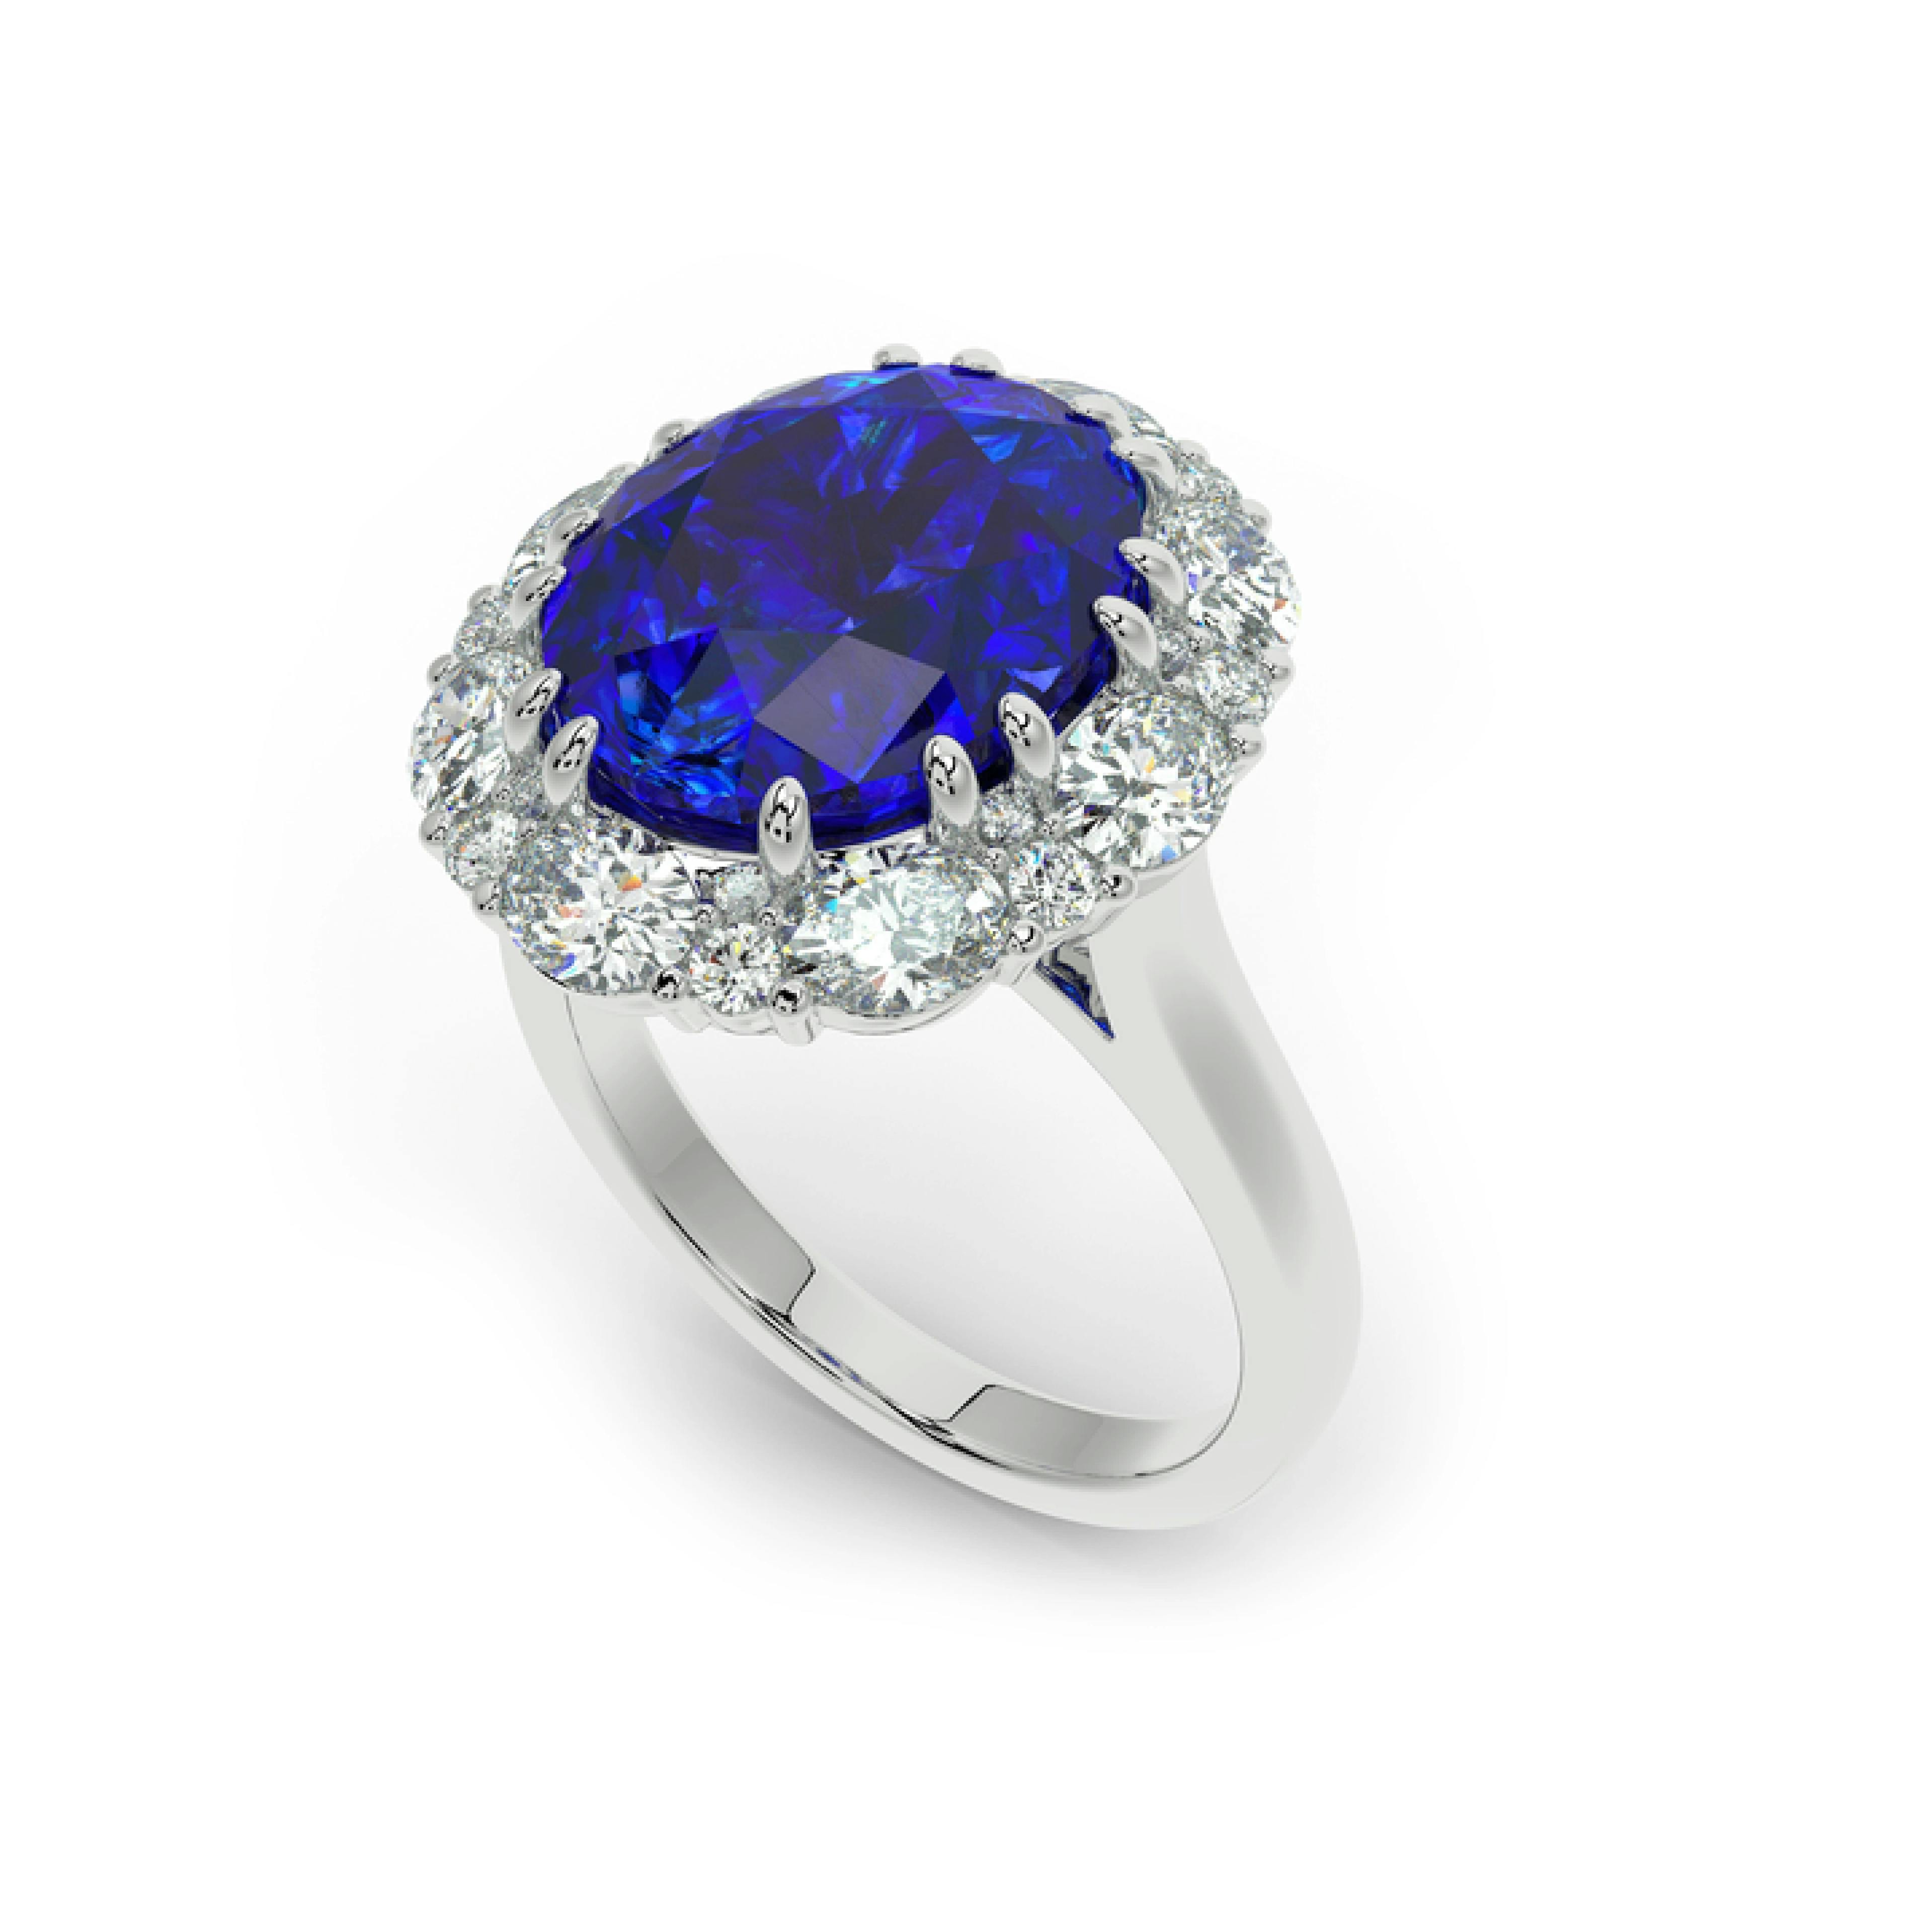 Rendered image of a Sapphire and Diamond Halo ring in White Gold